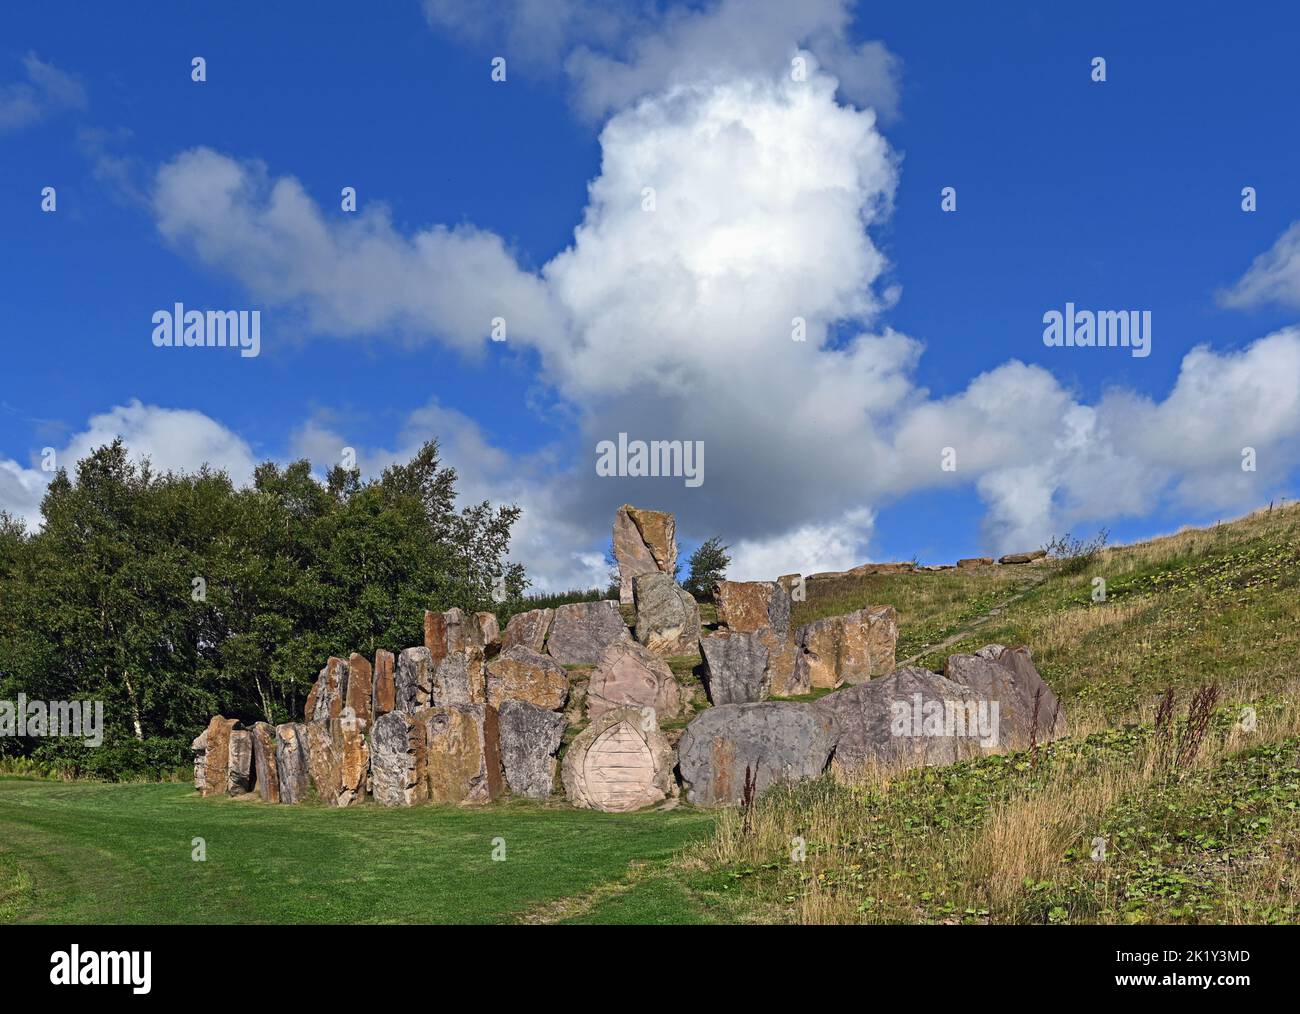 'Multiverse'. outdoor artwork by Charles Jencks. Crawick Multiverse, Sanquhar, Dumfries and Galloway, Scotland, United Kingdom, Europe. Stock Photo